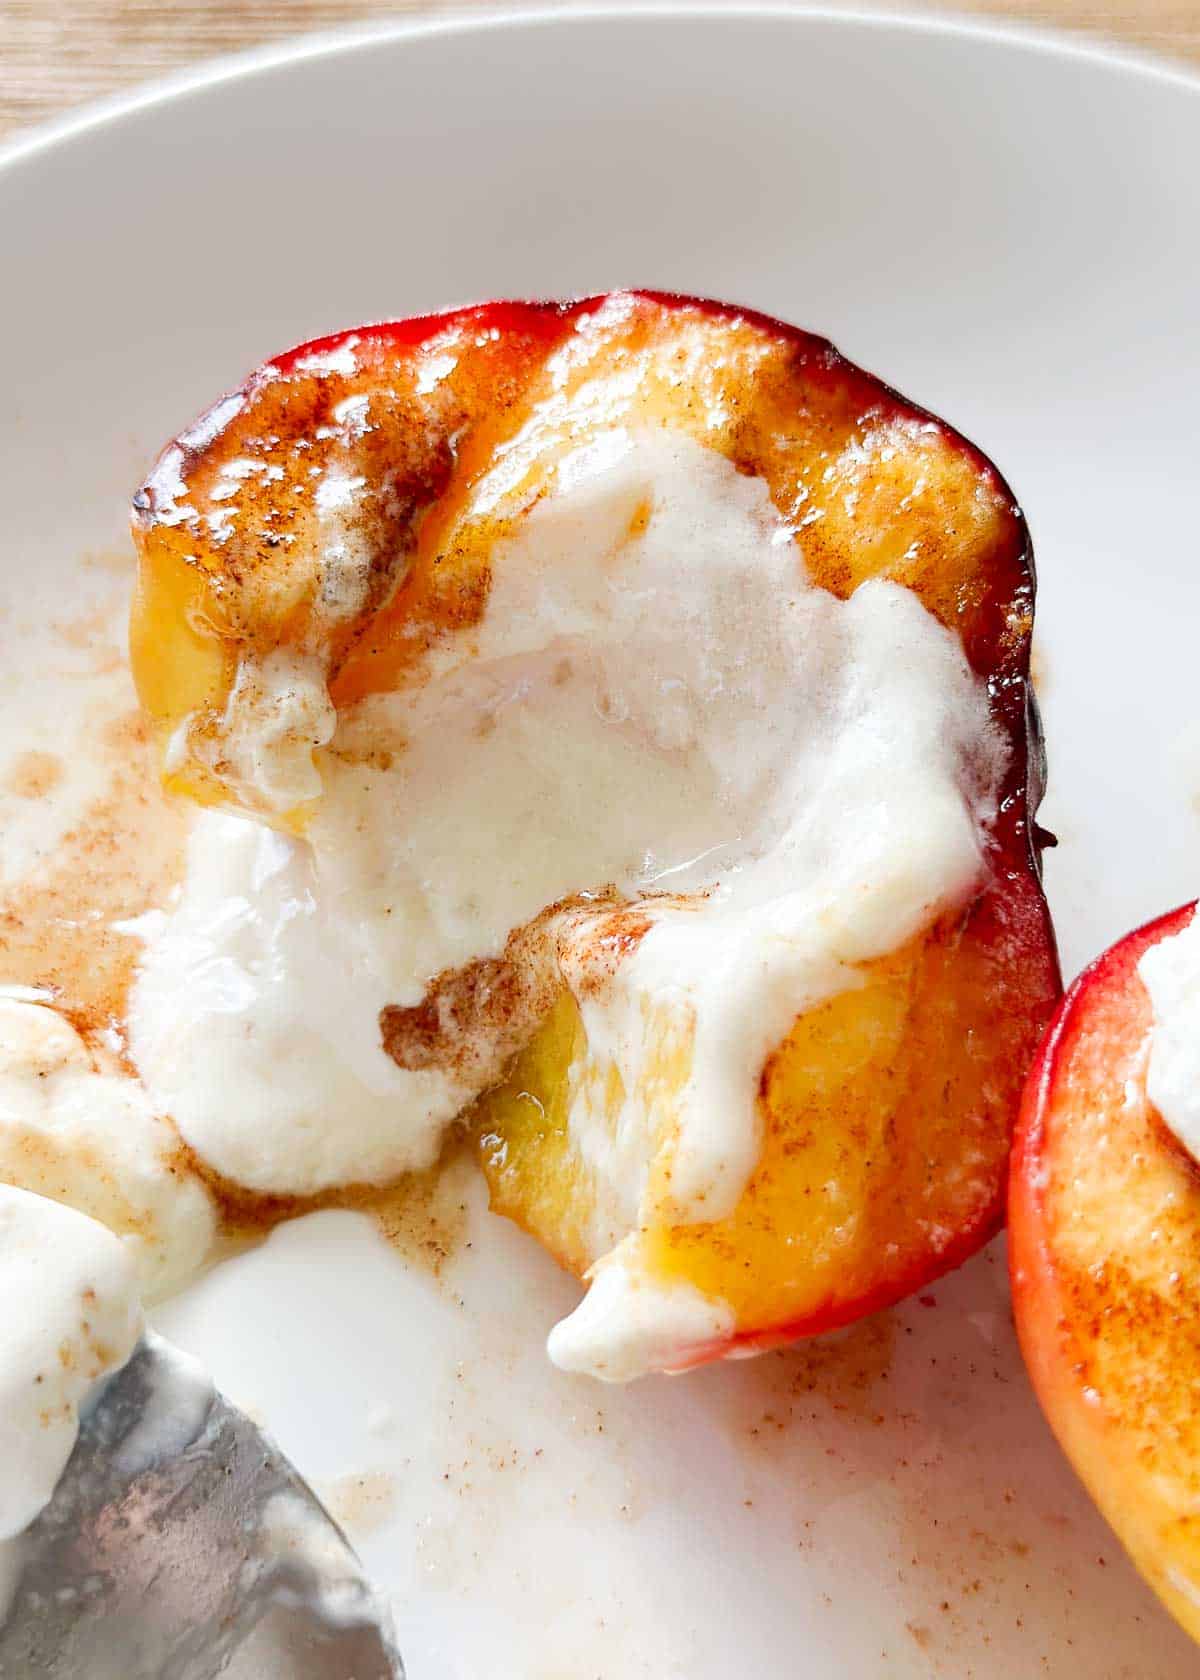 Grilled peaches on a plate with whipped cream.